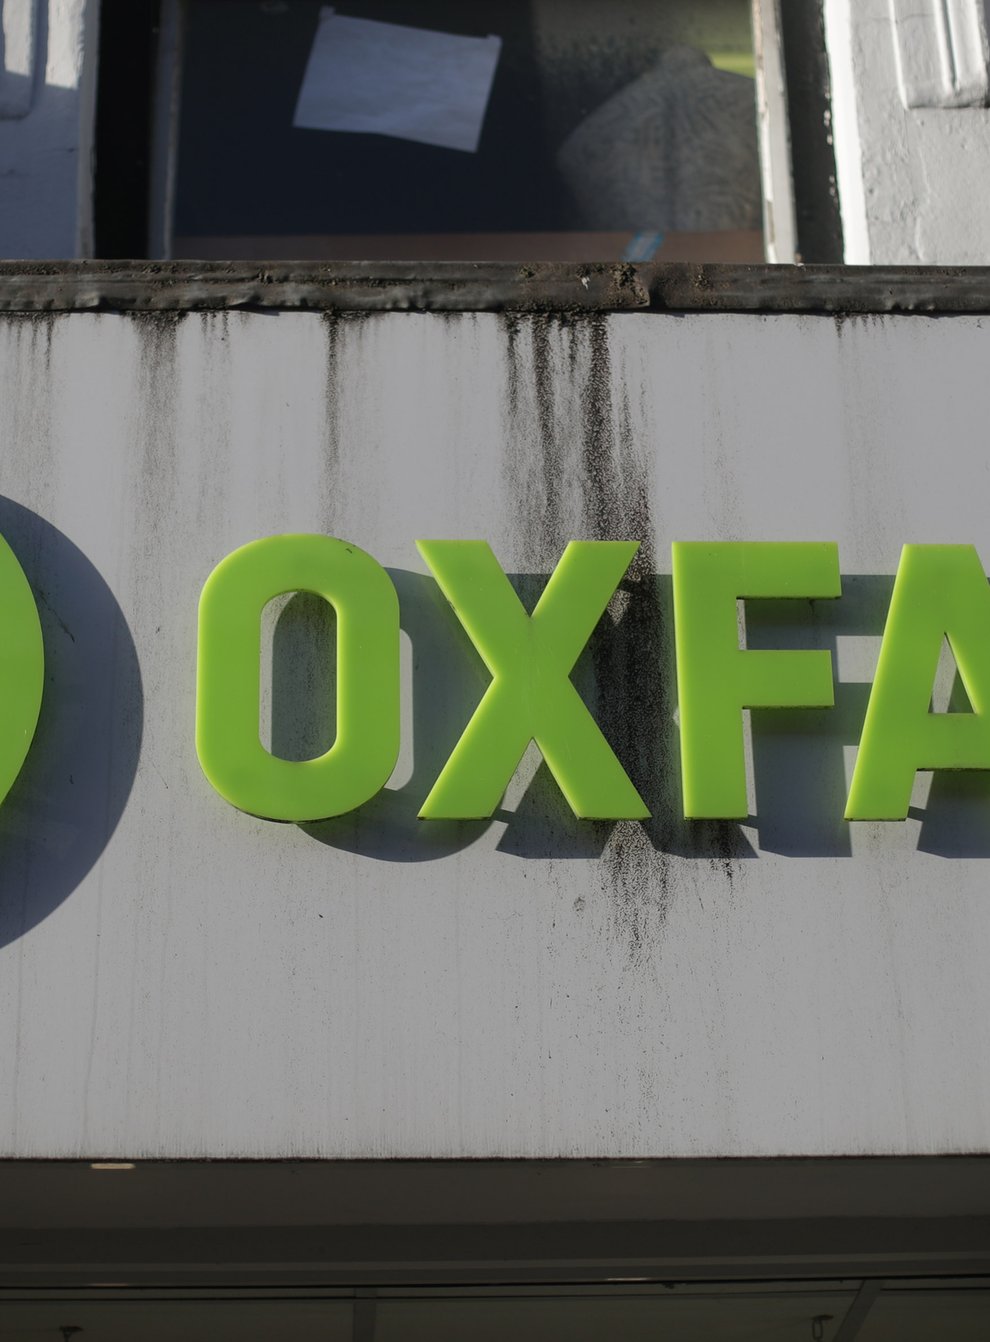 Oxfam had its UK aid funding halted last year following claims of sexual misconduct against staff (Yui Mok/PA)